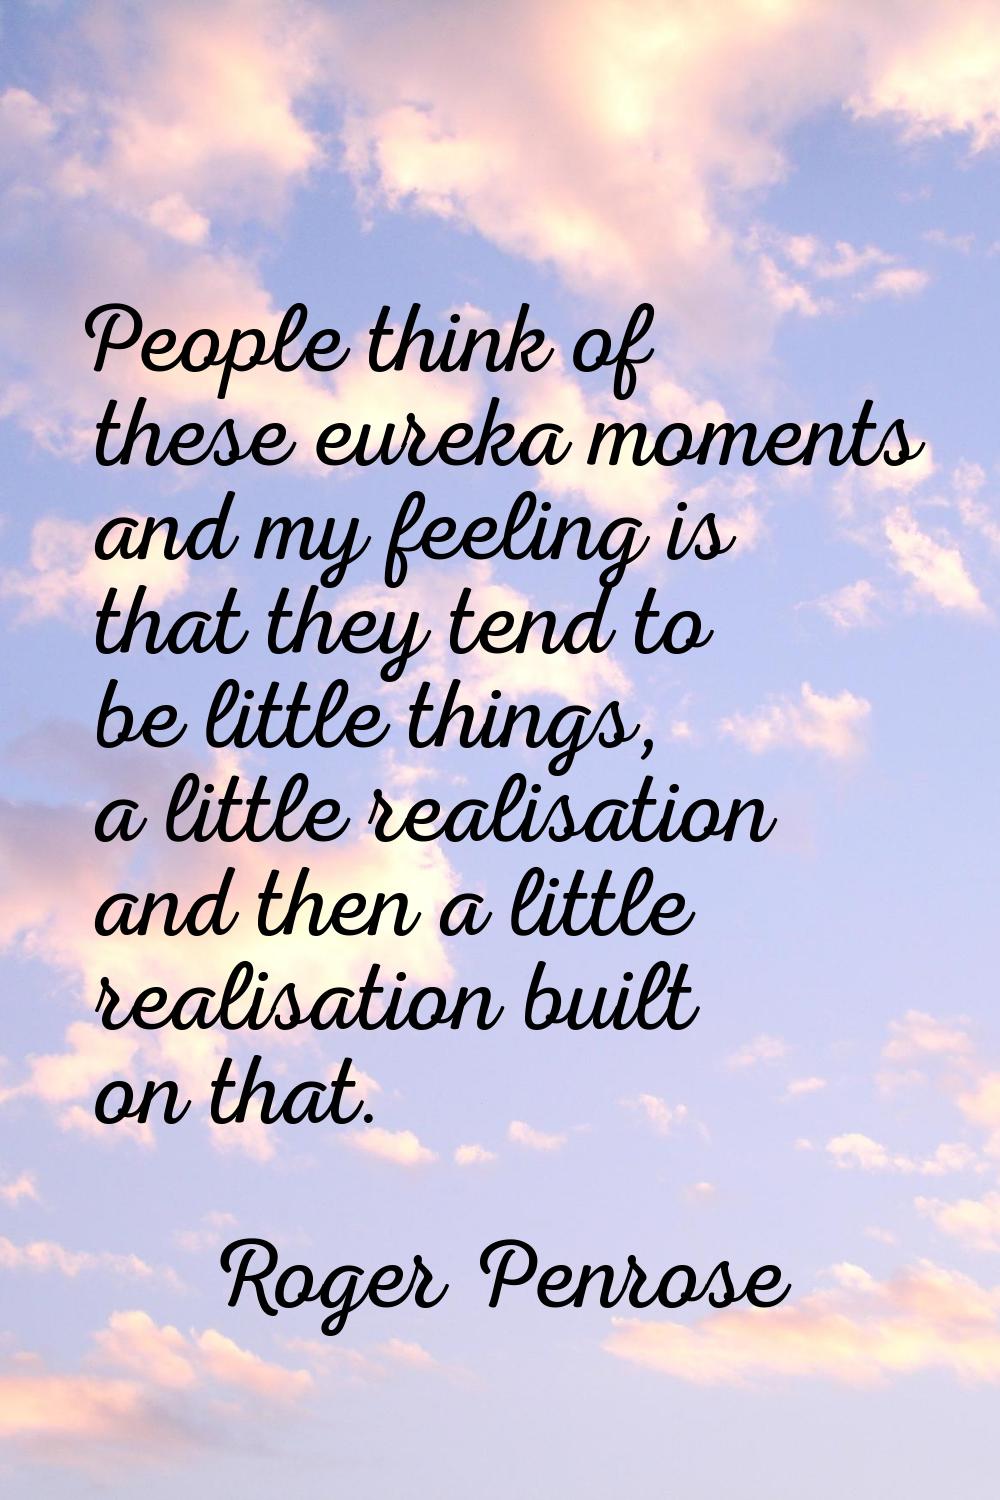 People think of these eureka moments and my feeling is that they tend to be little things, a little